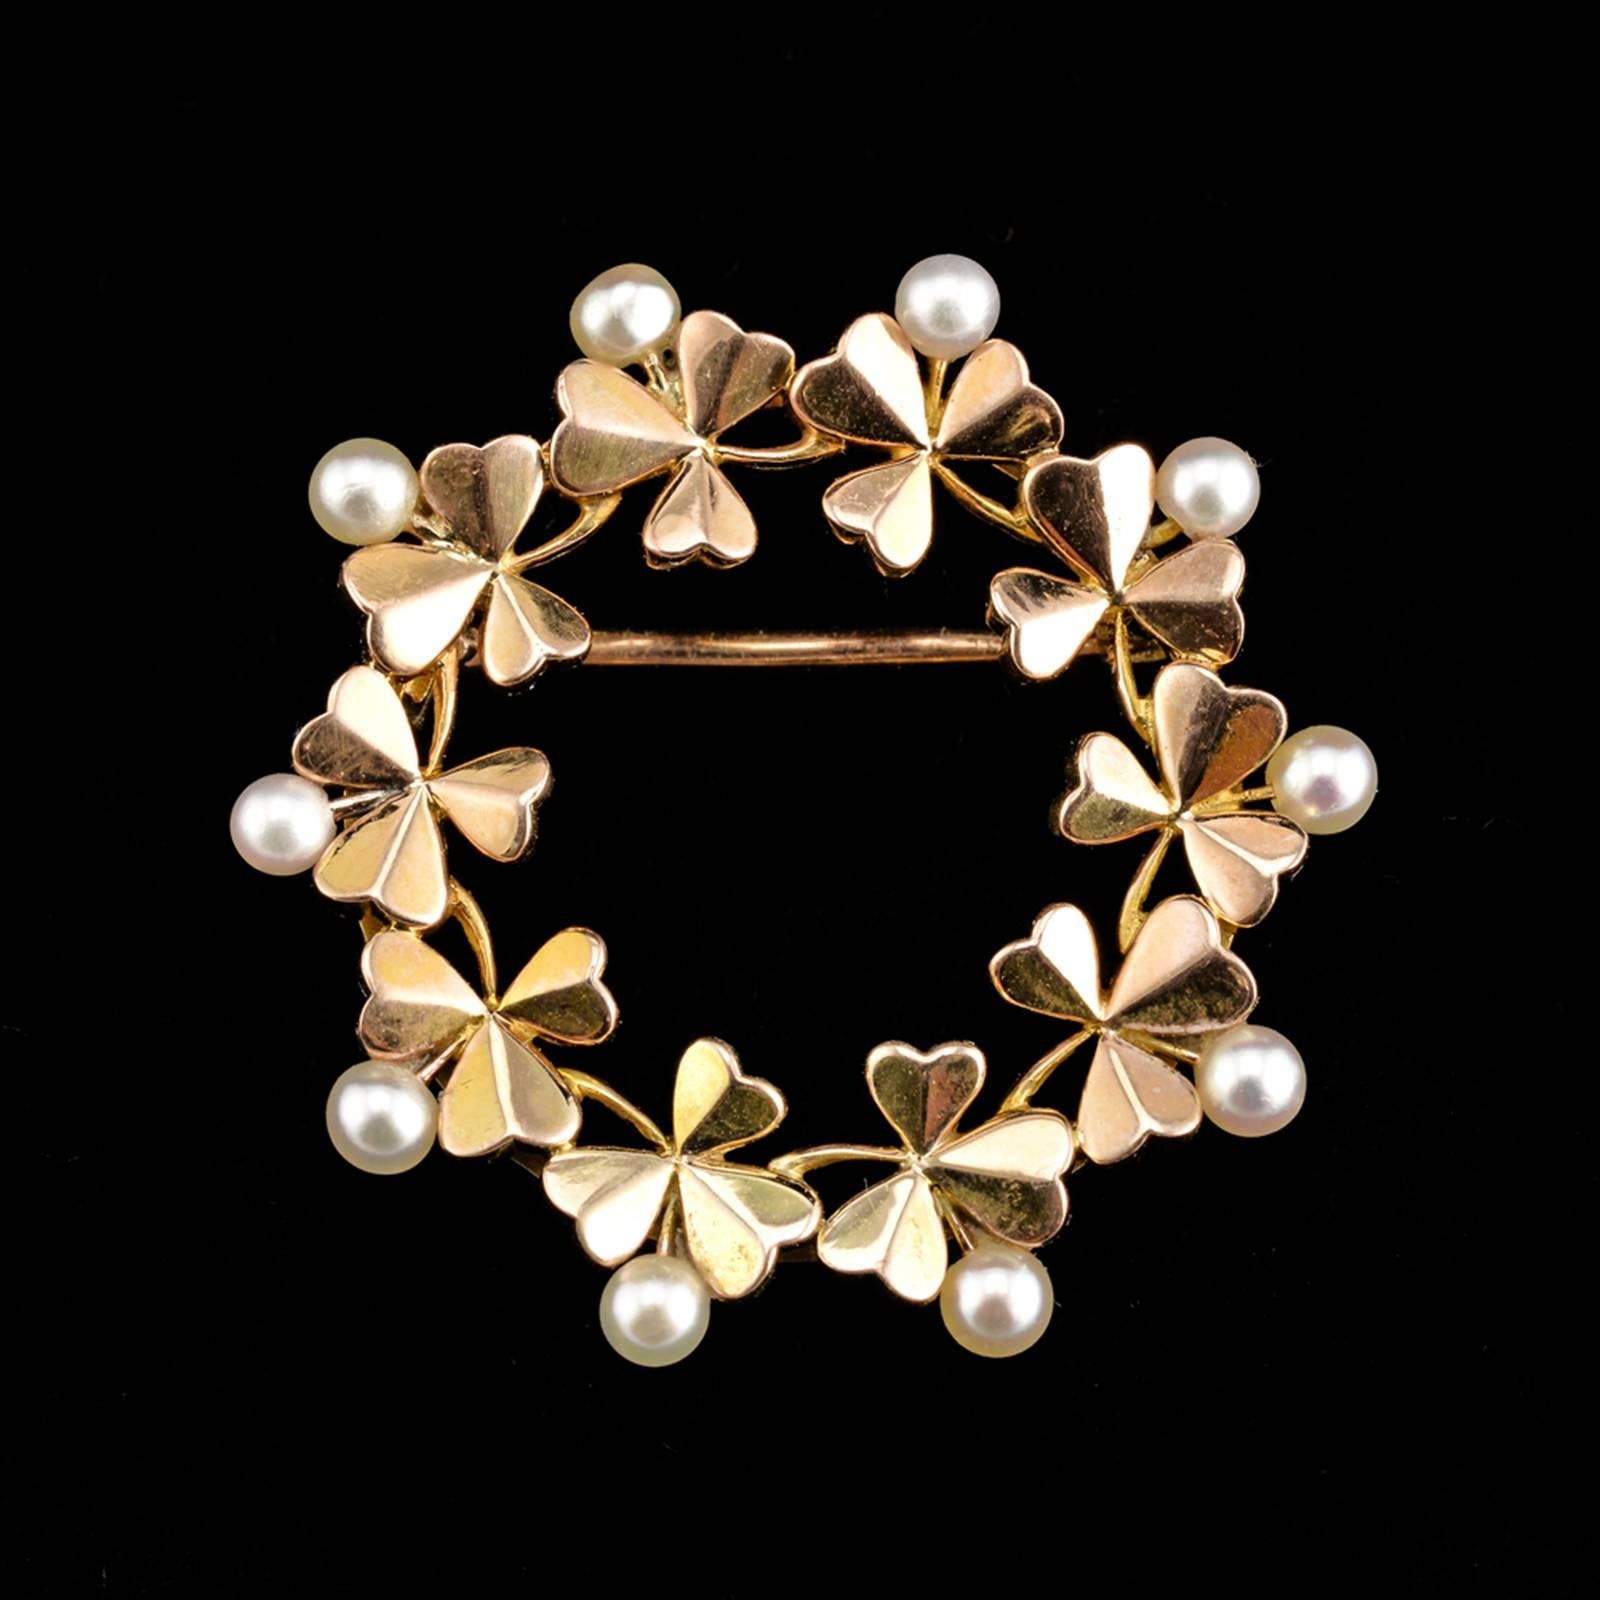 A Fabergé gold and pearl circular brooch, workmaster Wilhelm Reimer, St. Petersburg, circa 1890, with Fabergé scratched inventory number 1191 or 1611 and 36365. The circular gold brooch formed as a wreath of ten three-leaf clover, with pearls set